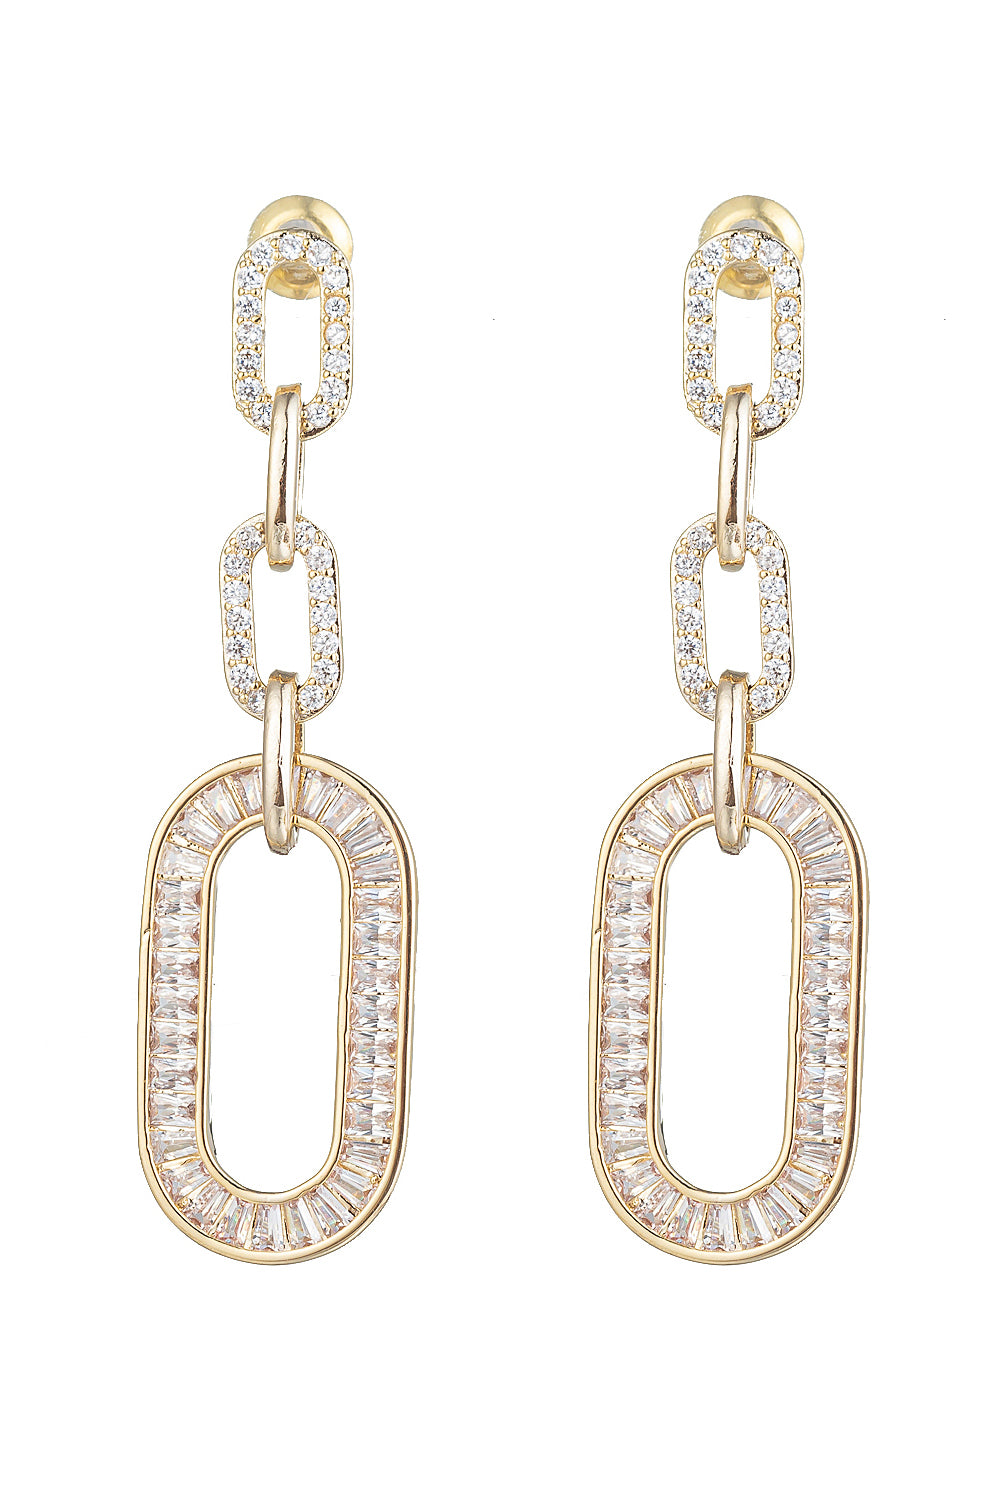 Silver tone brass statement earrings studded with CZ crystals.